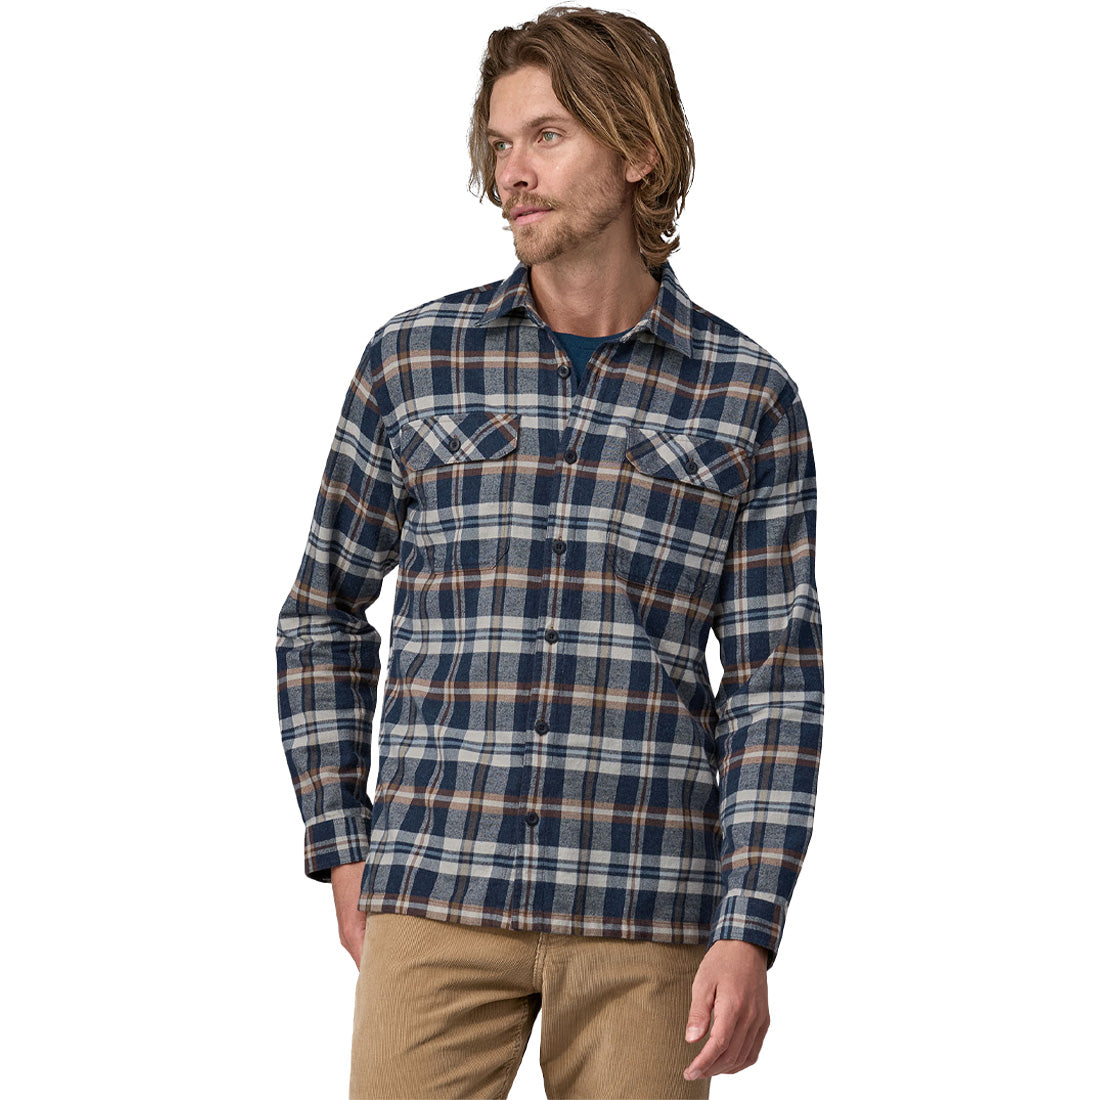 Patagonia Midweight Fjord Flannel Shirt - Women's